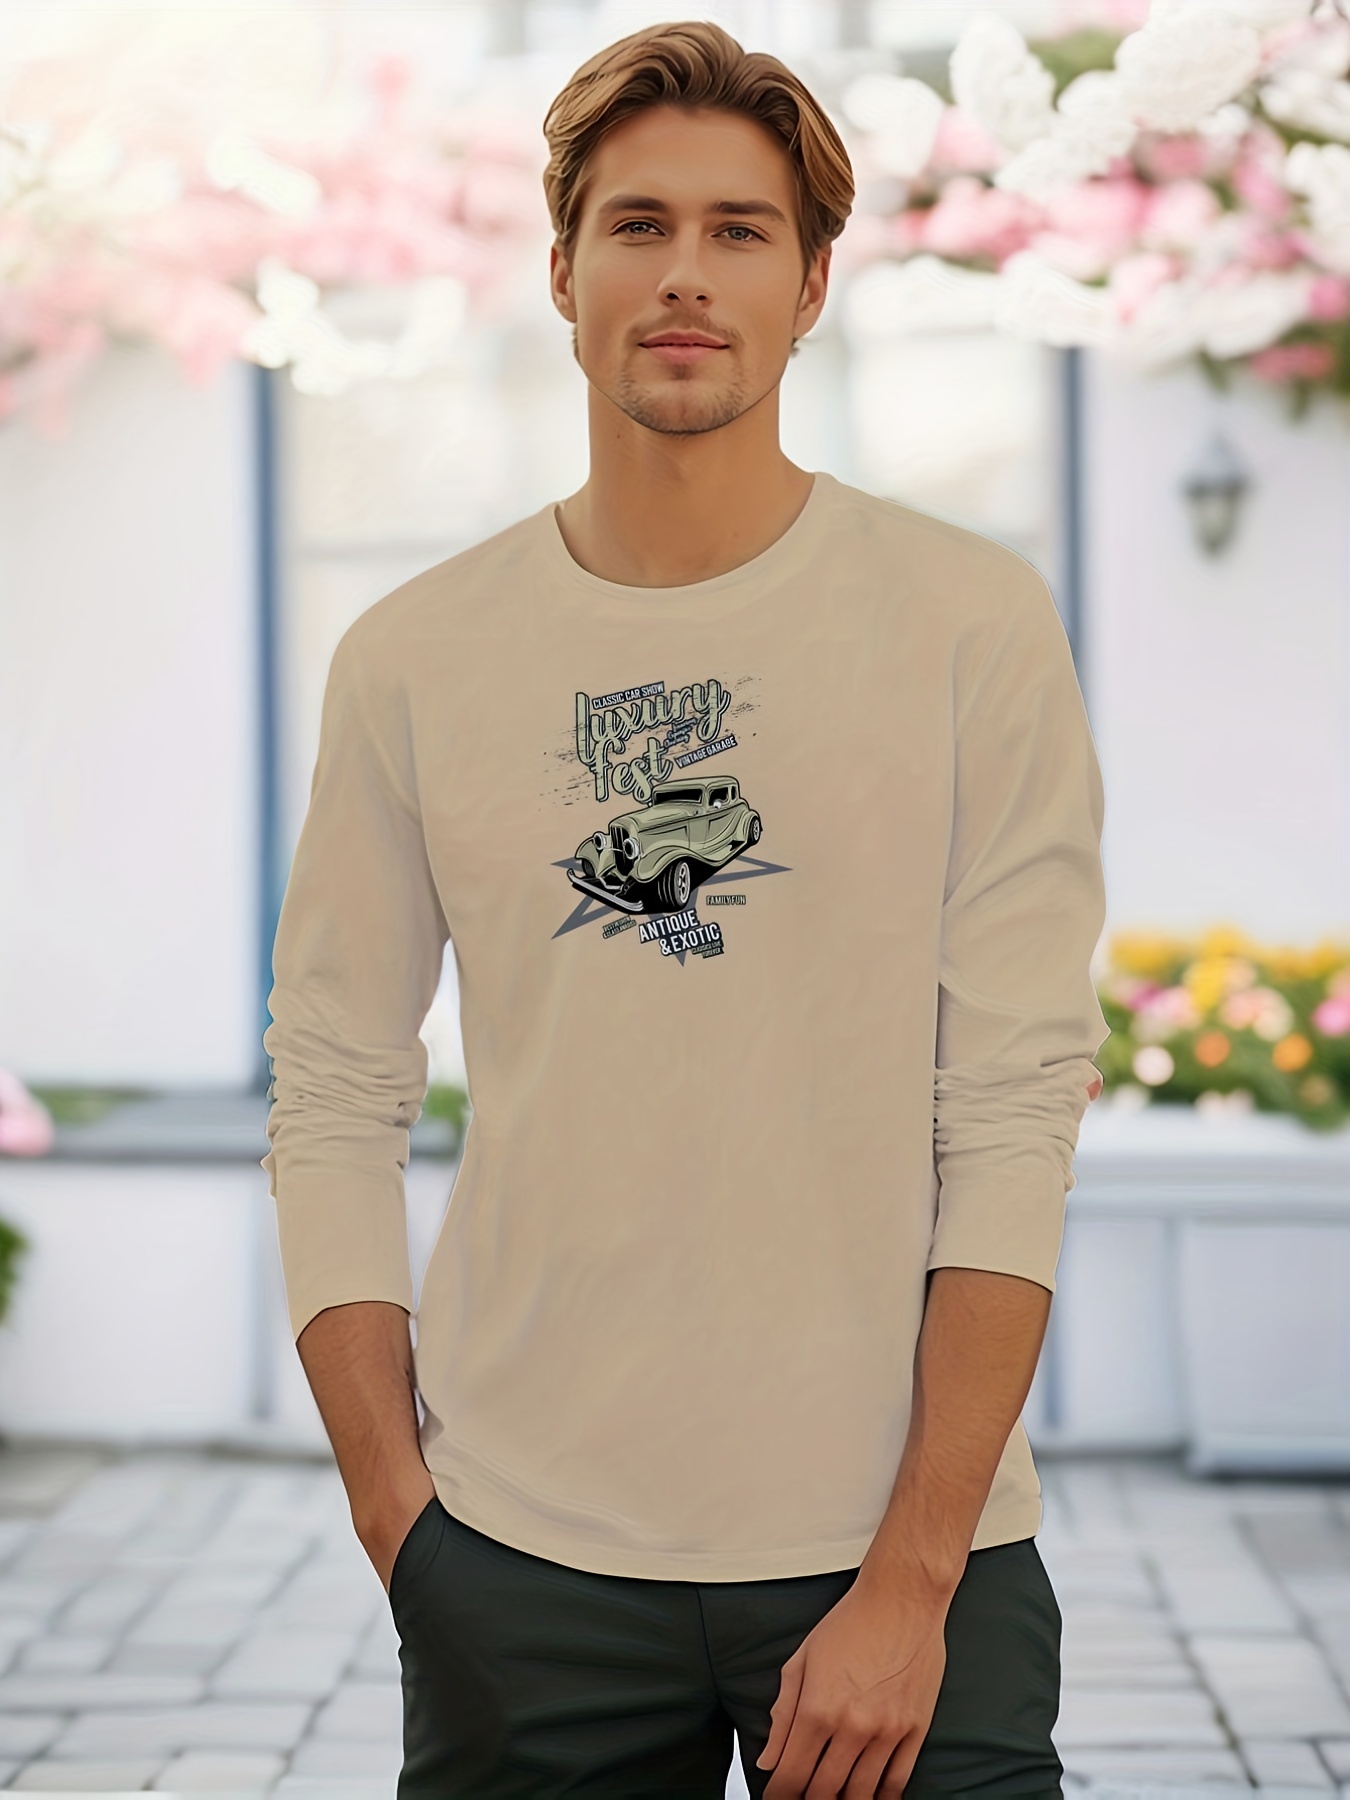 Long-Sleeved Graphic Shirt - Luxury Green